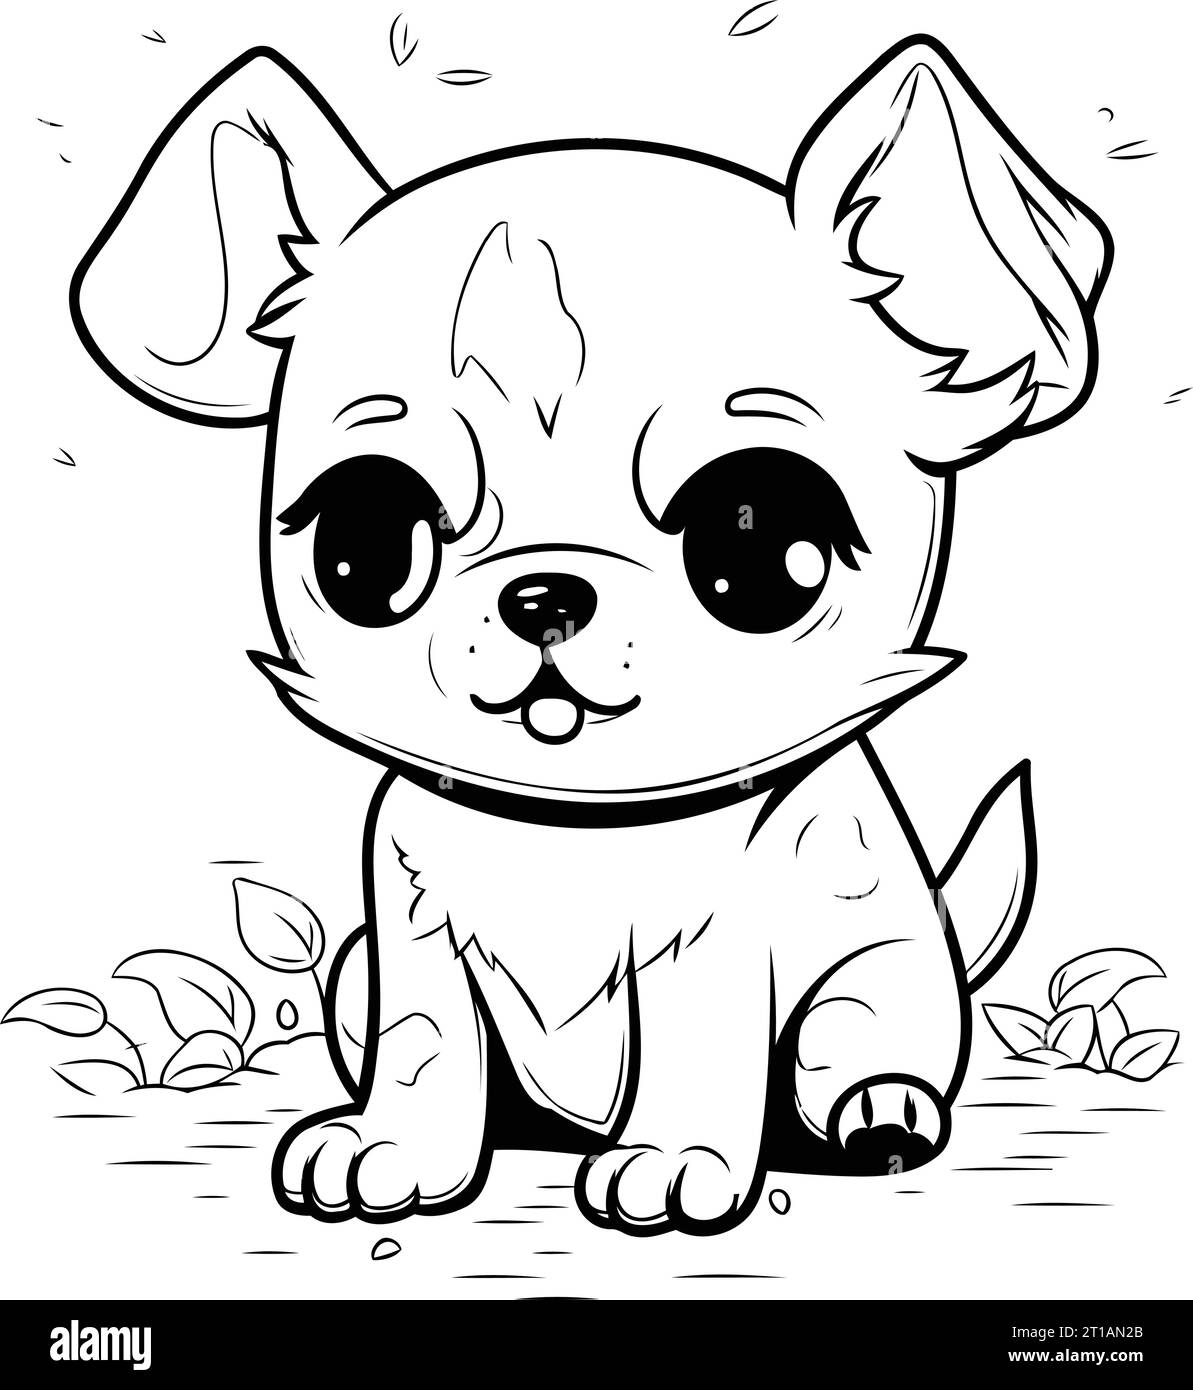 Coloring Pages. Cat And Chihuahua Dog In Funny Accessories. Line Art Design  For Adult Colouring Book With Doodle And Elements. Vector Illustration.  Royalty Free SVG, Cliparts, Vectors, and Stock Illustration. Image  150142548.